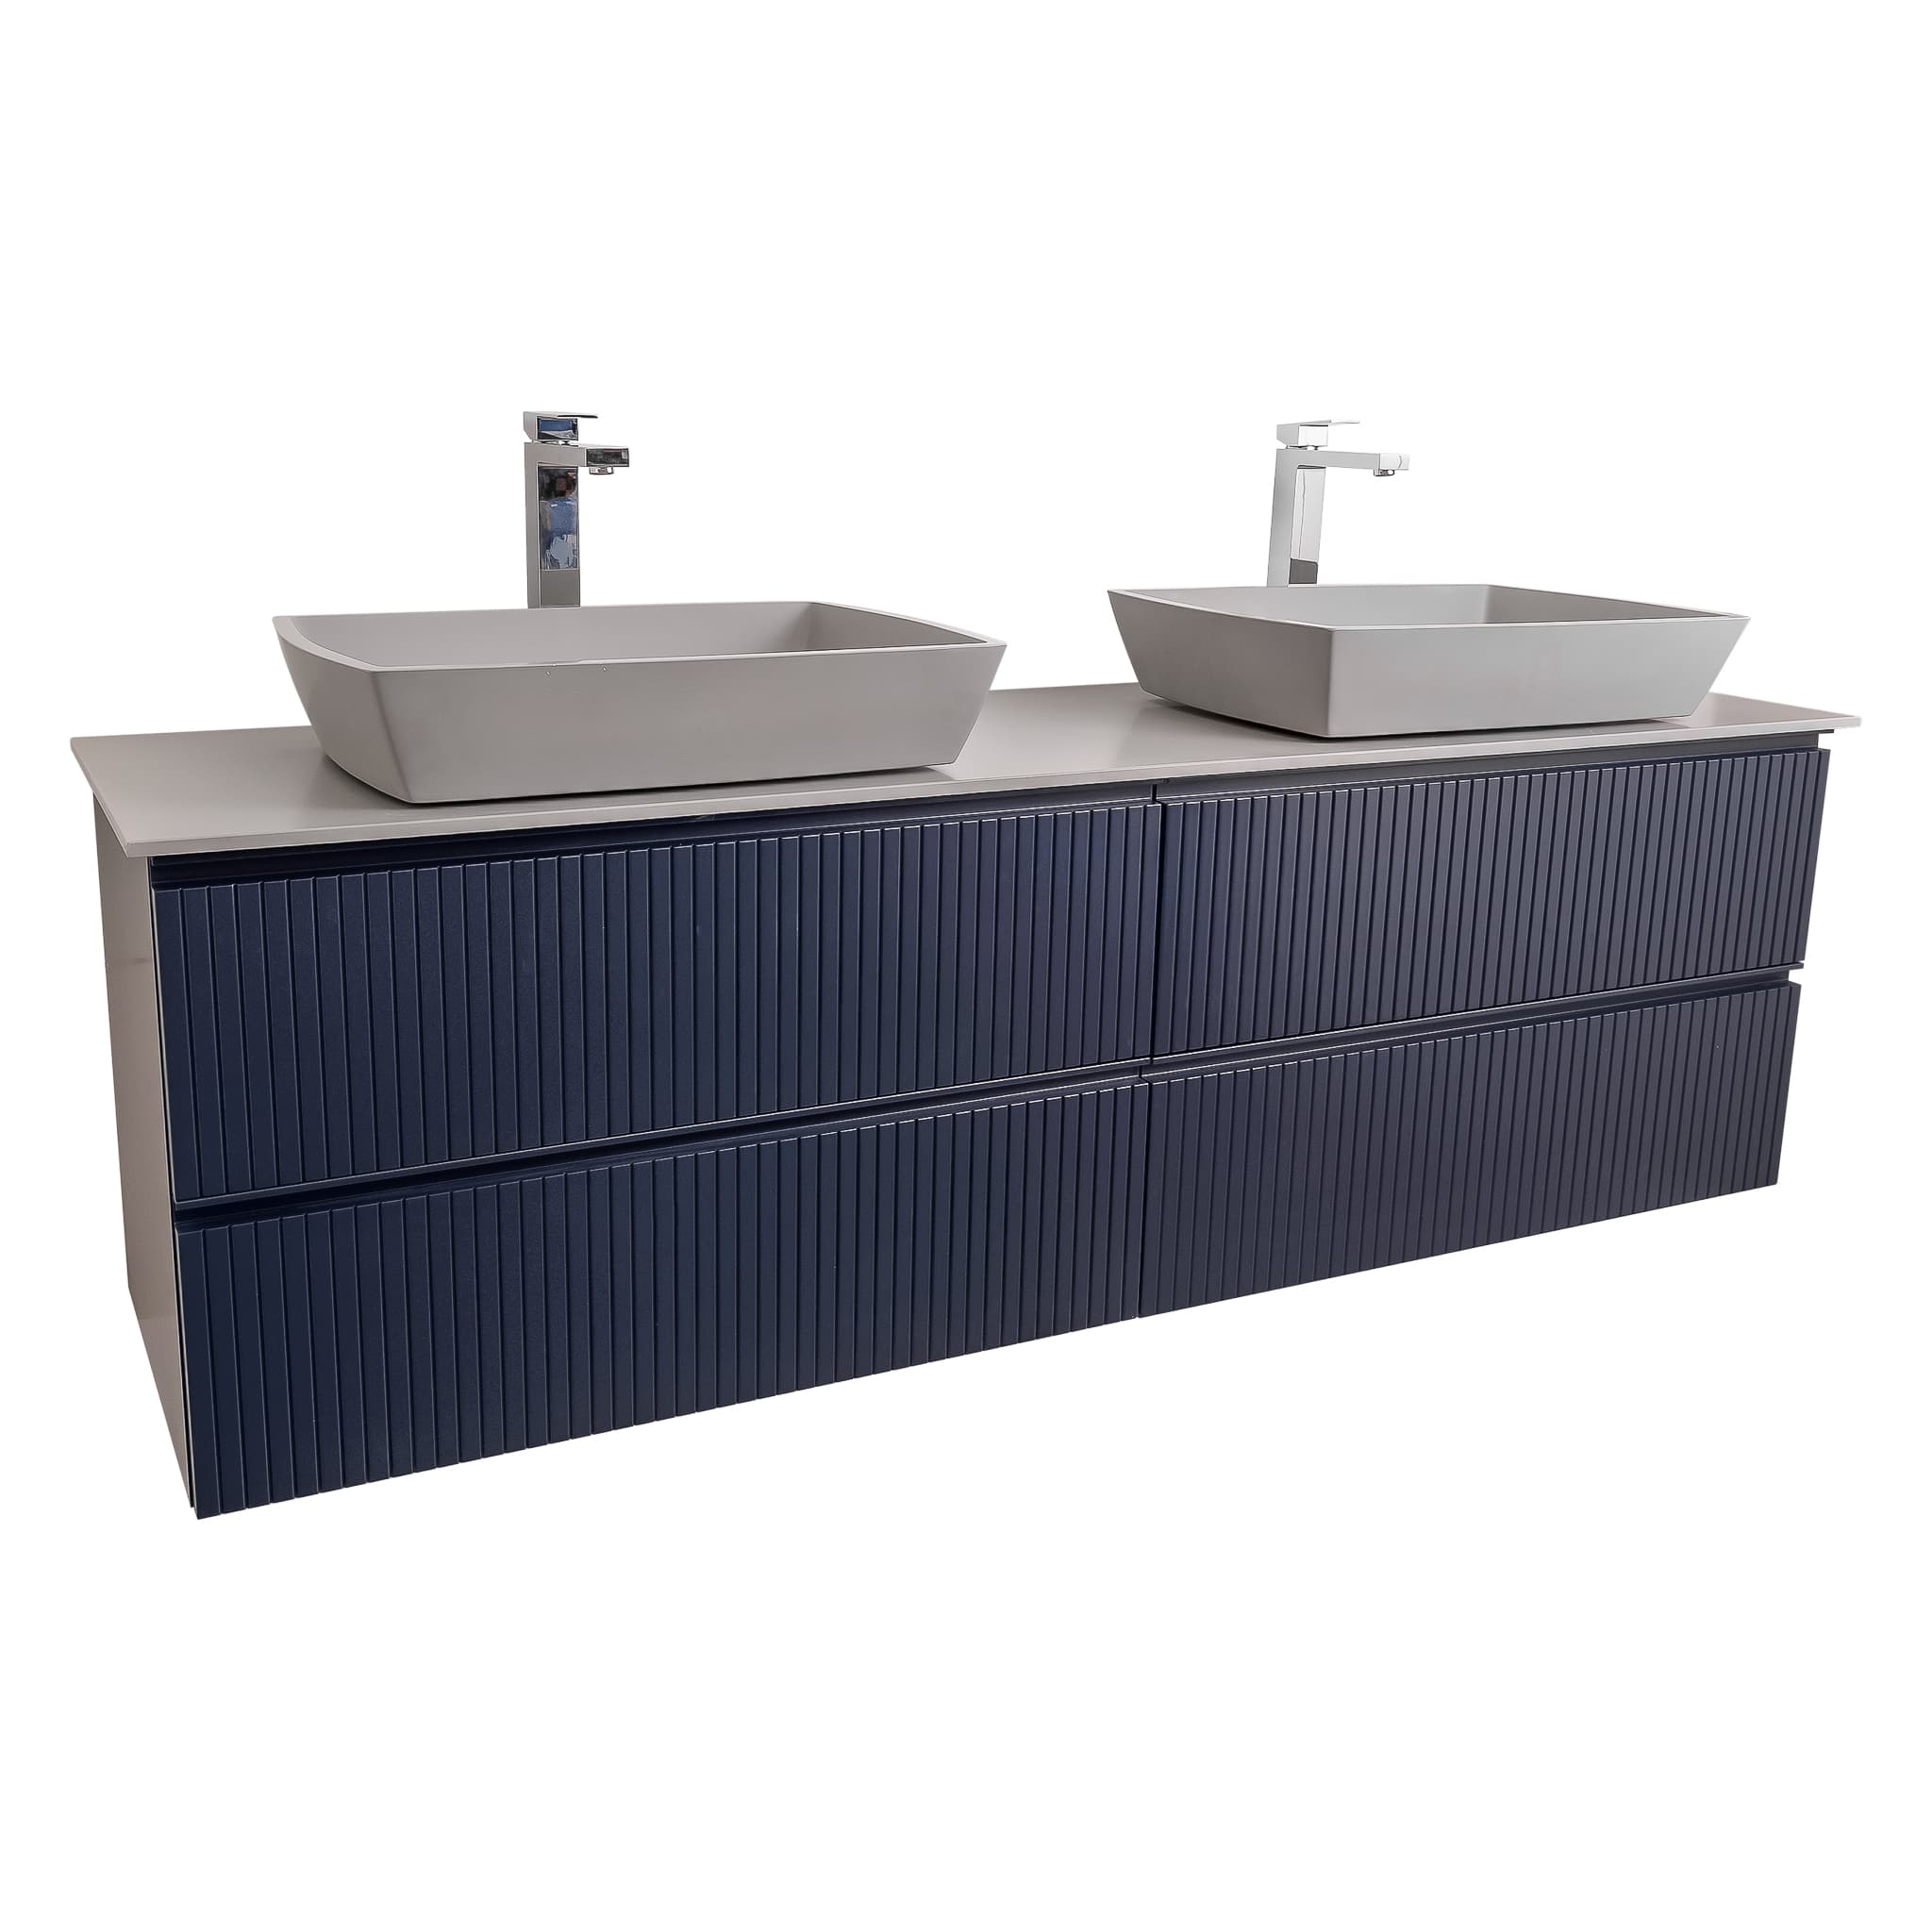 Ares 63 Matte Navy Blue Cabinet, Solid Surface Flat Grey Counter And Two Square Solid Surface Grey Basin 1316, Wall Mounted Modern Vanity Set